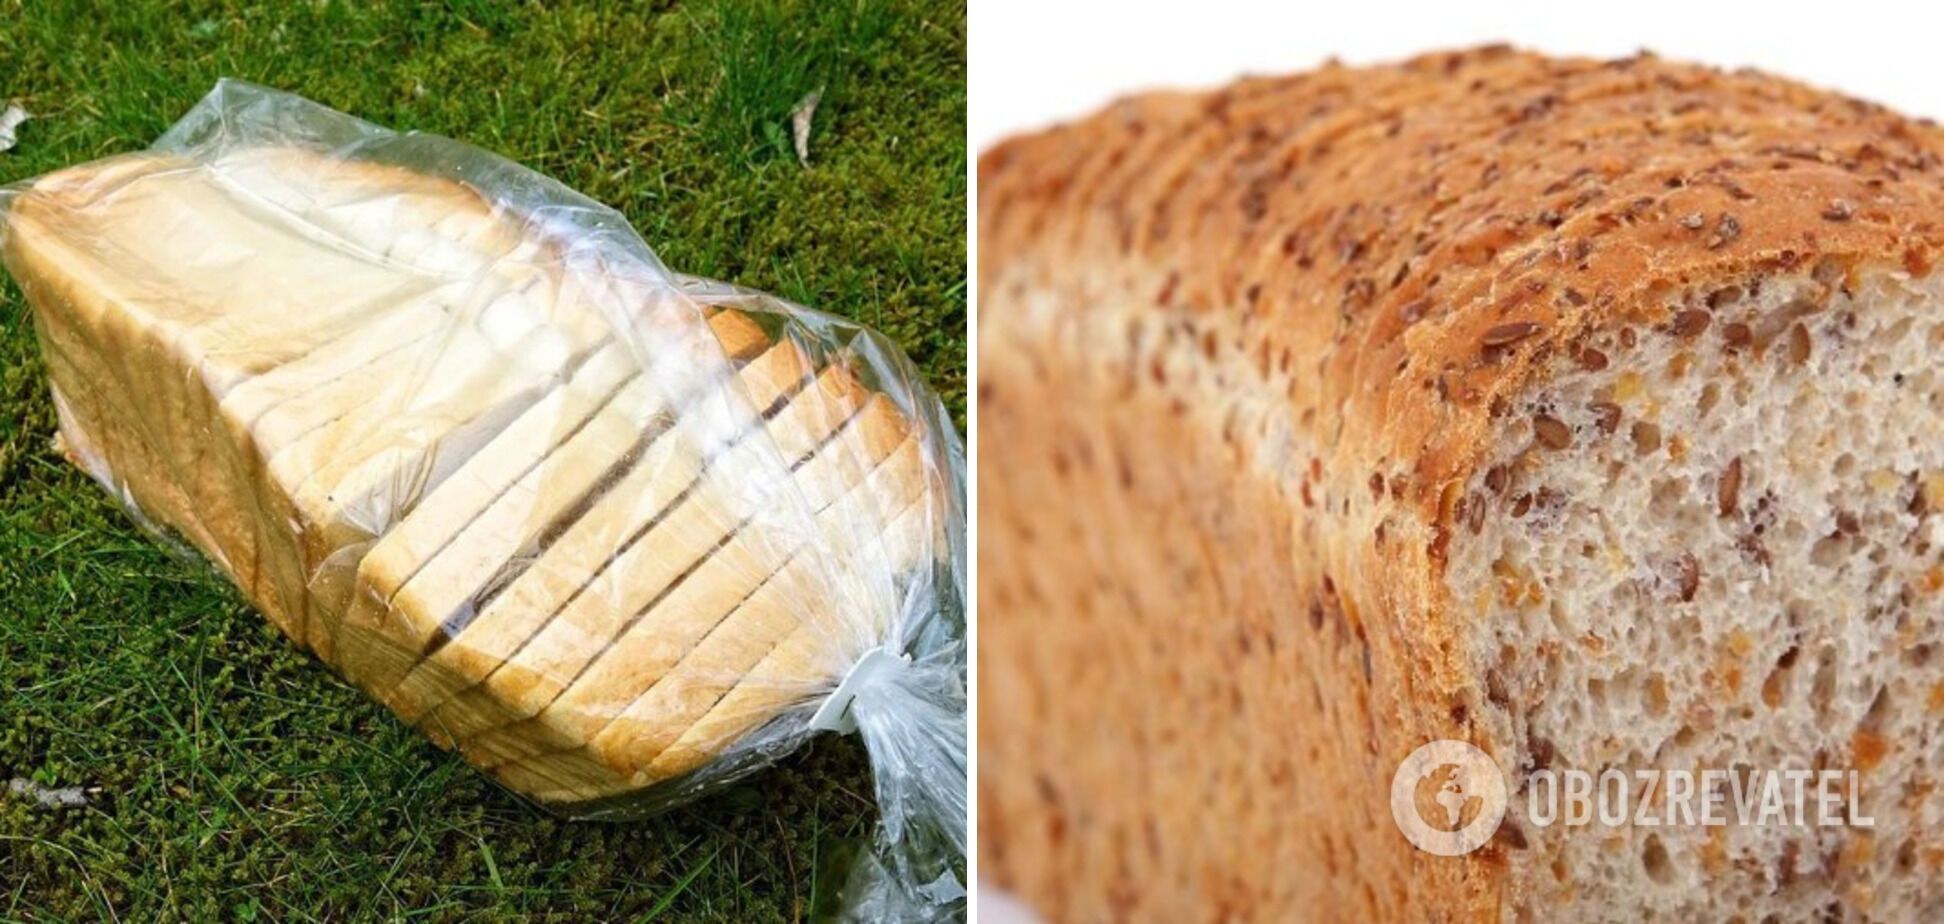 What is the harm of sliced bread from the store